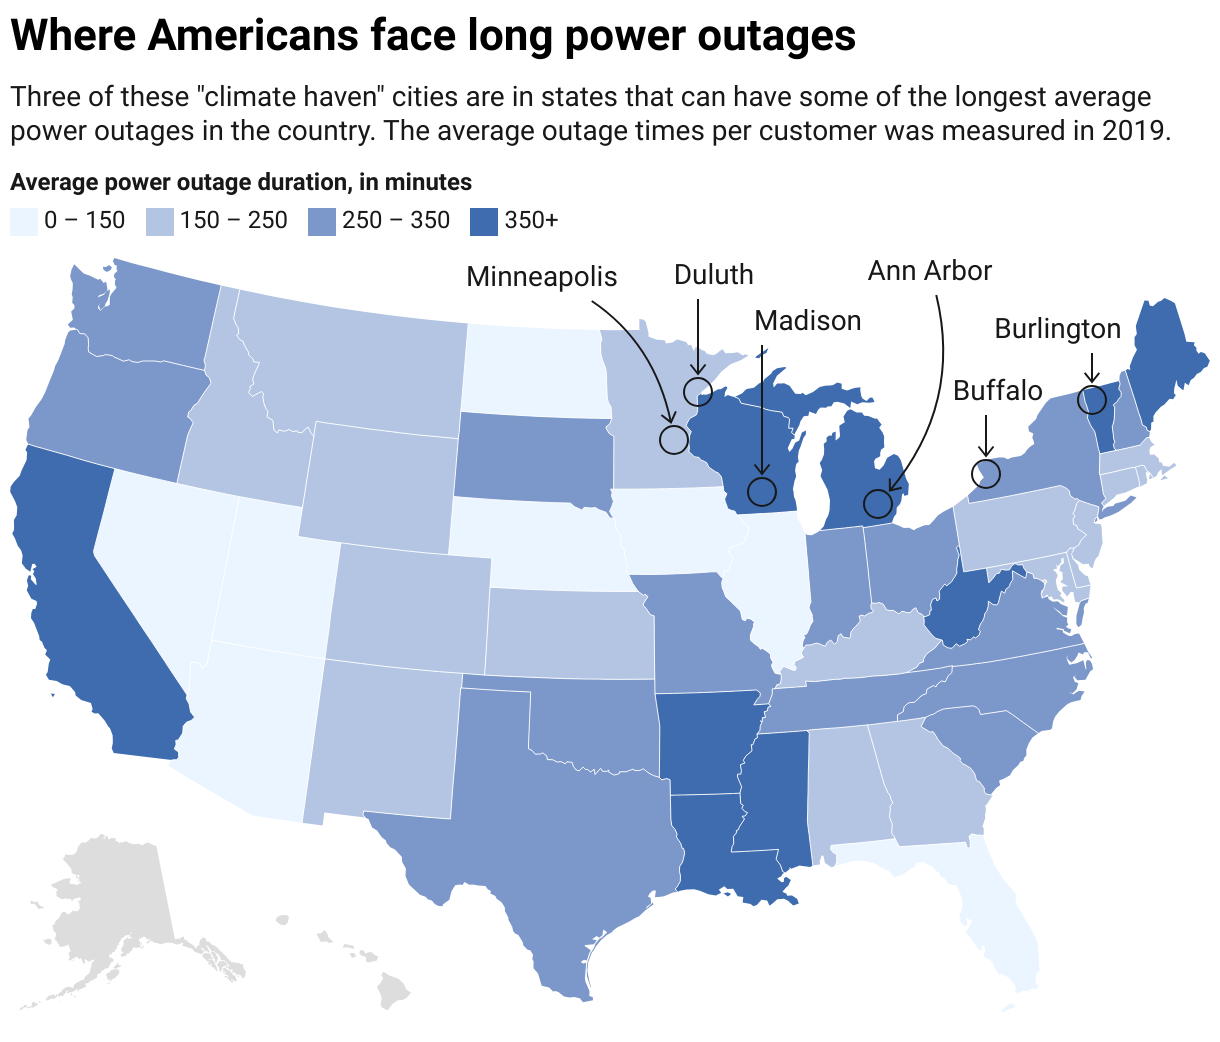 Color-coded U.S. map shows average power outage duration in each state in 2019 and highlights six “climate haven” cities, where power outage duration was in the middle or upper range.